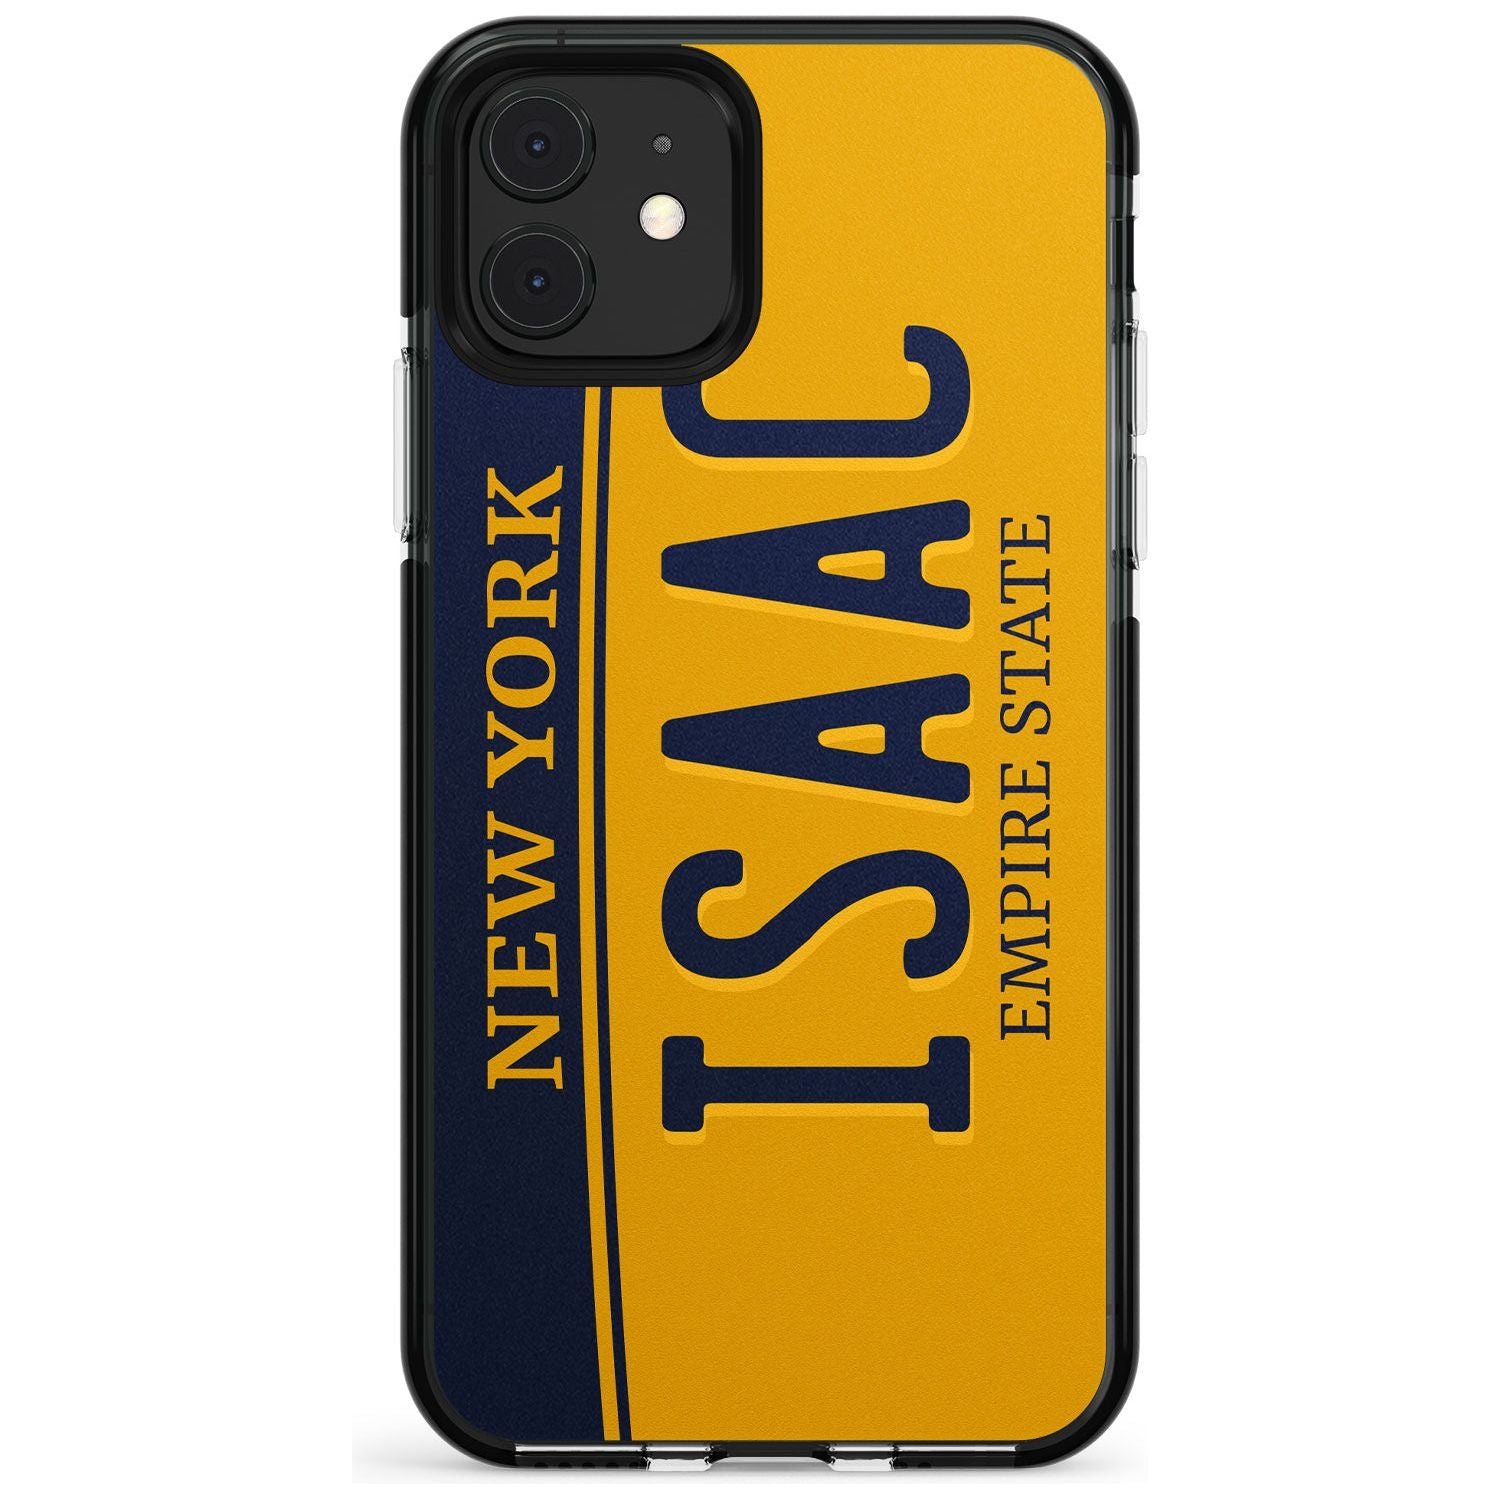 New York License Plate Pink Fade Impact Phone Case for iPhone 11 Pro Max